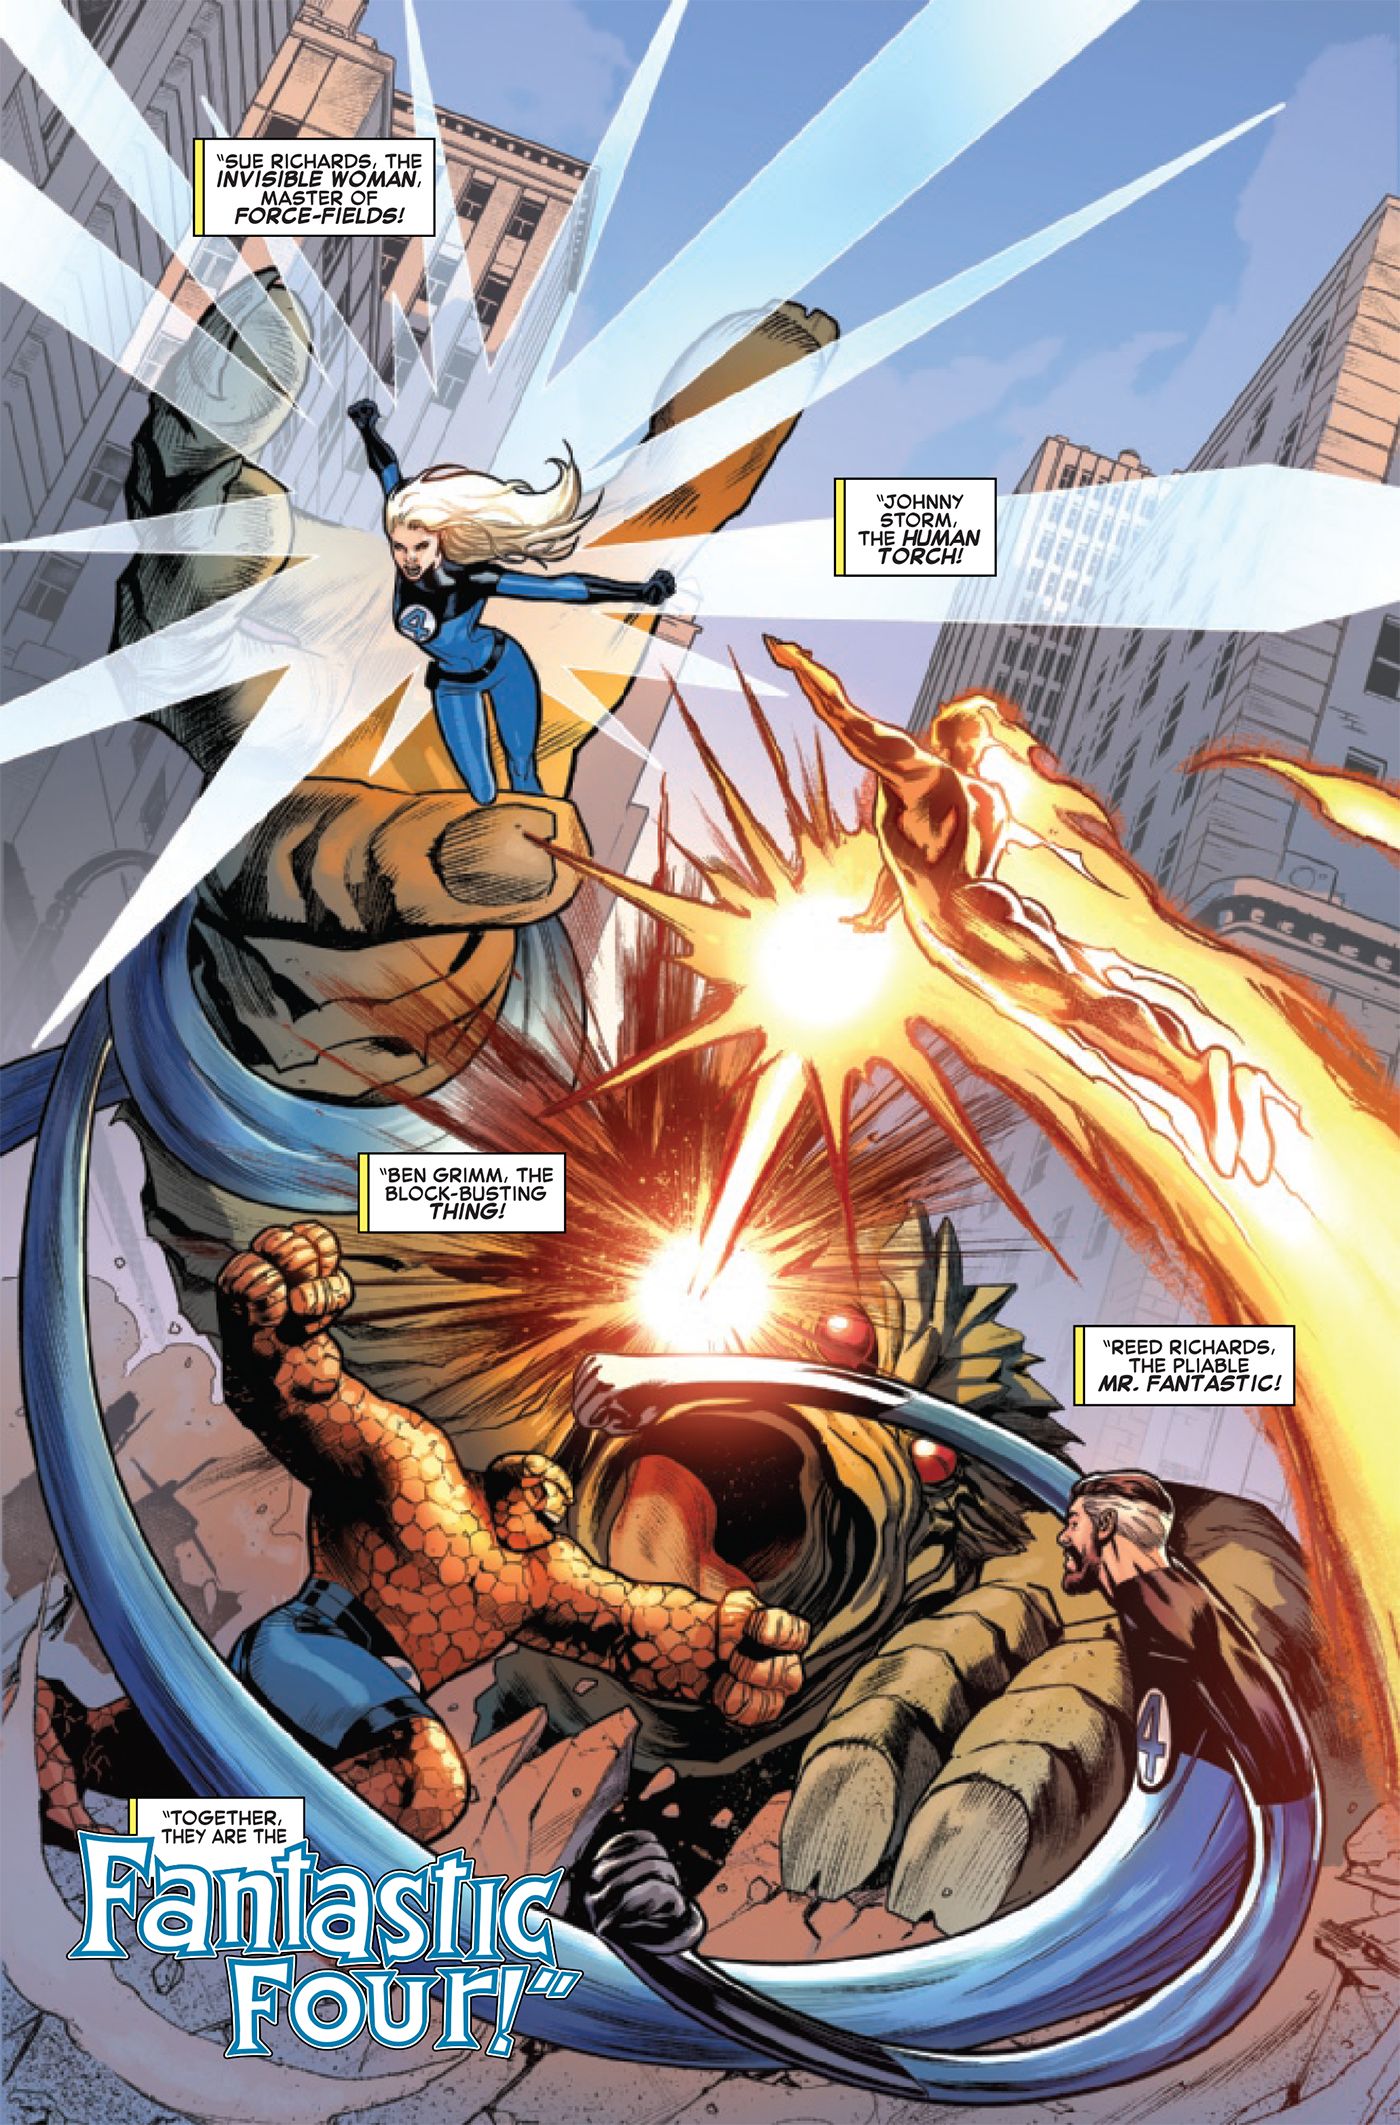 The Fantastic Four fight off a creature.